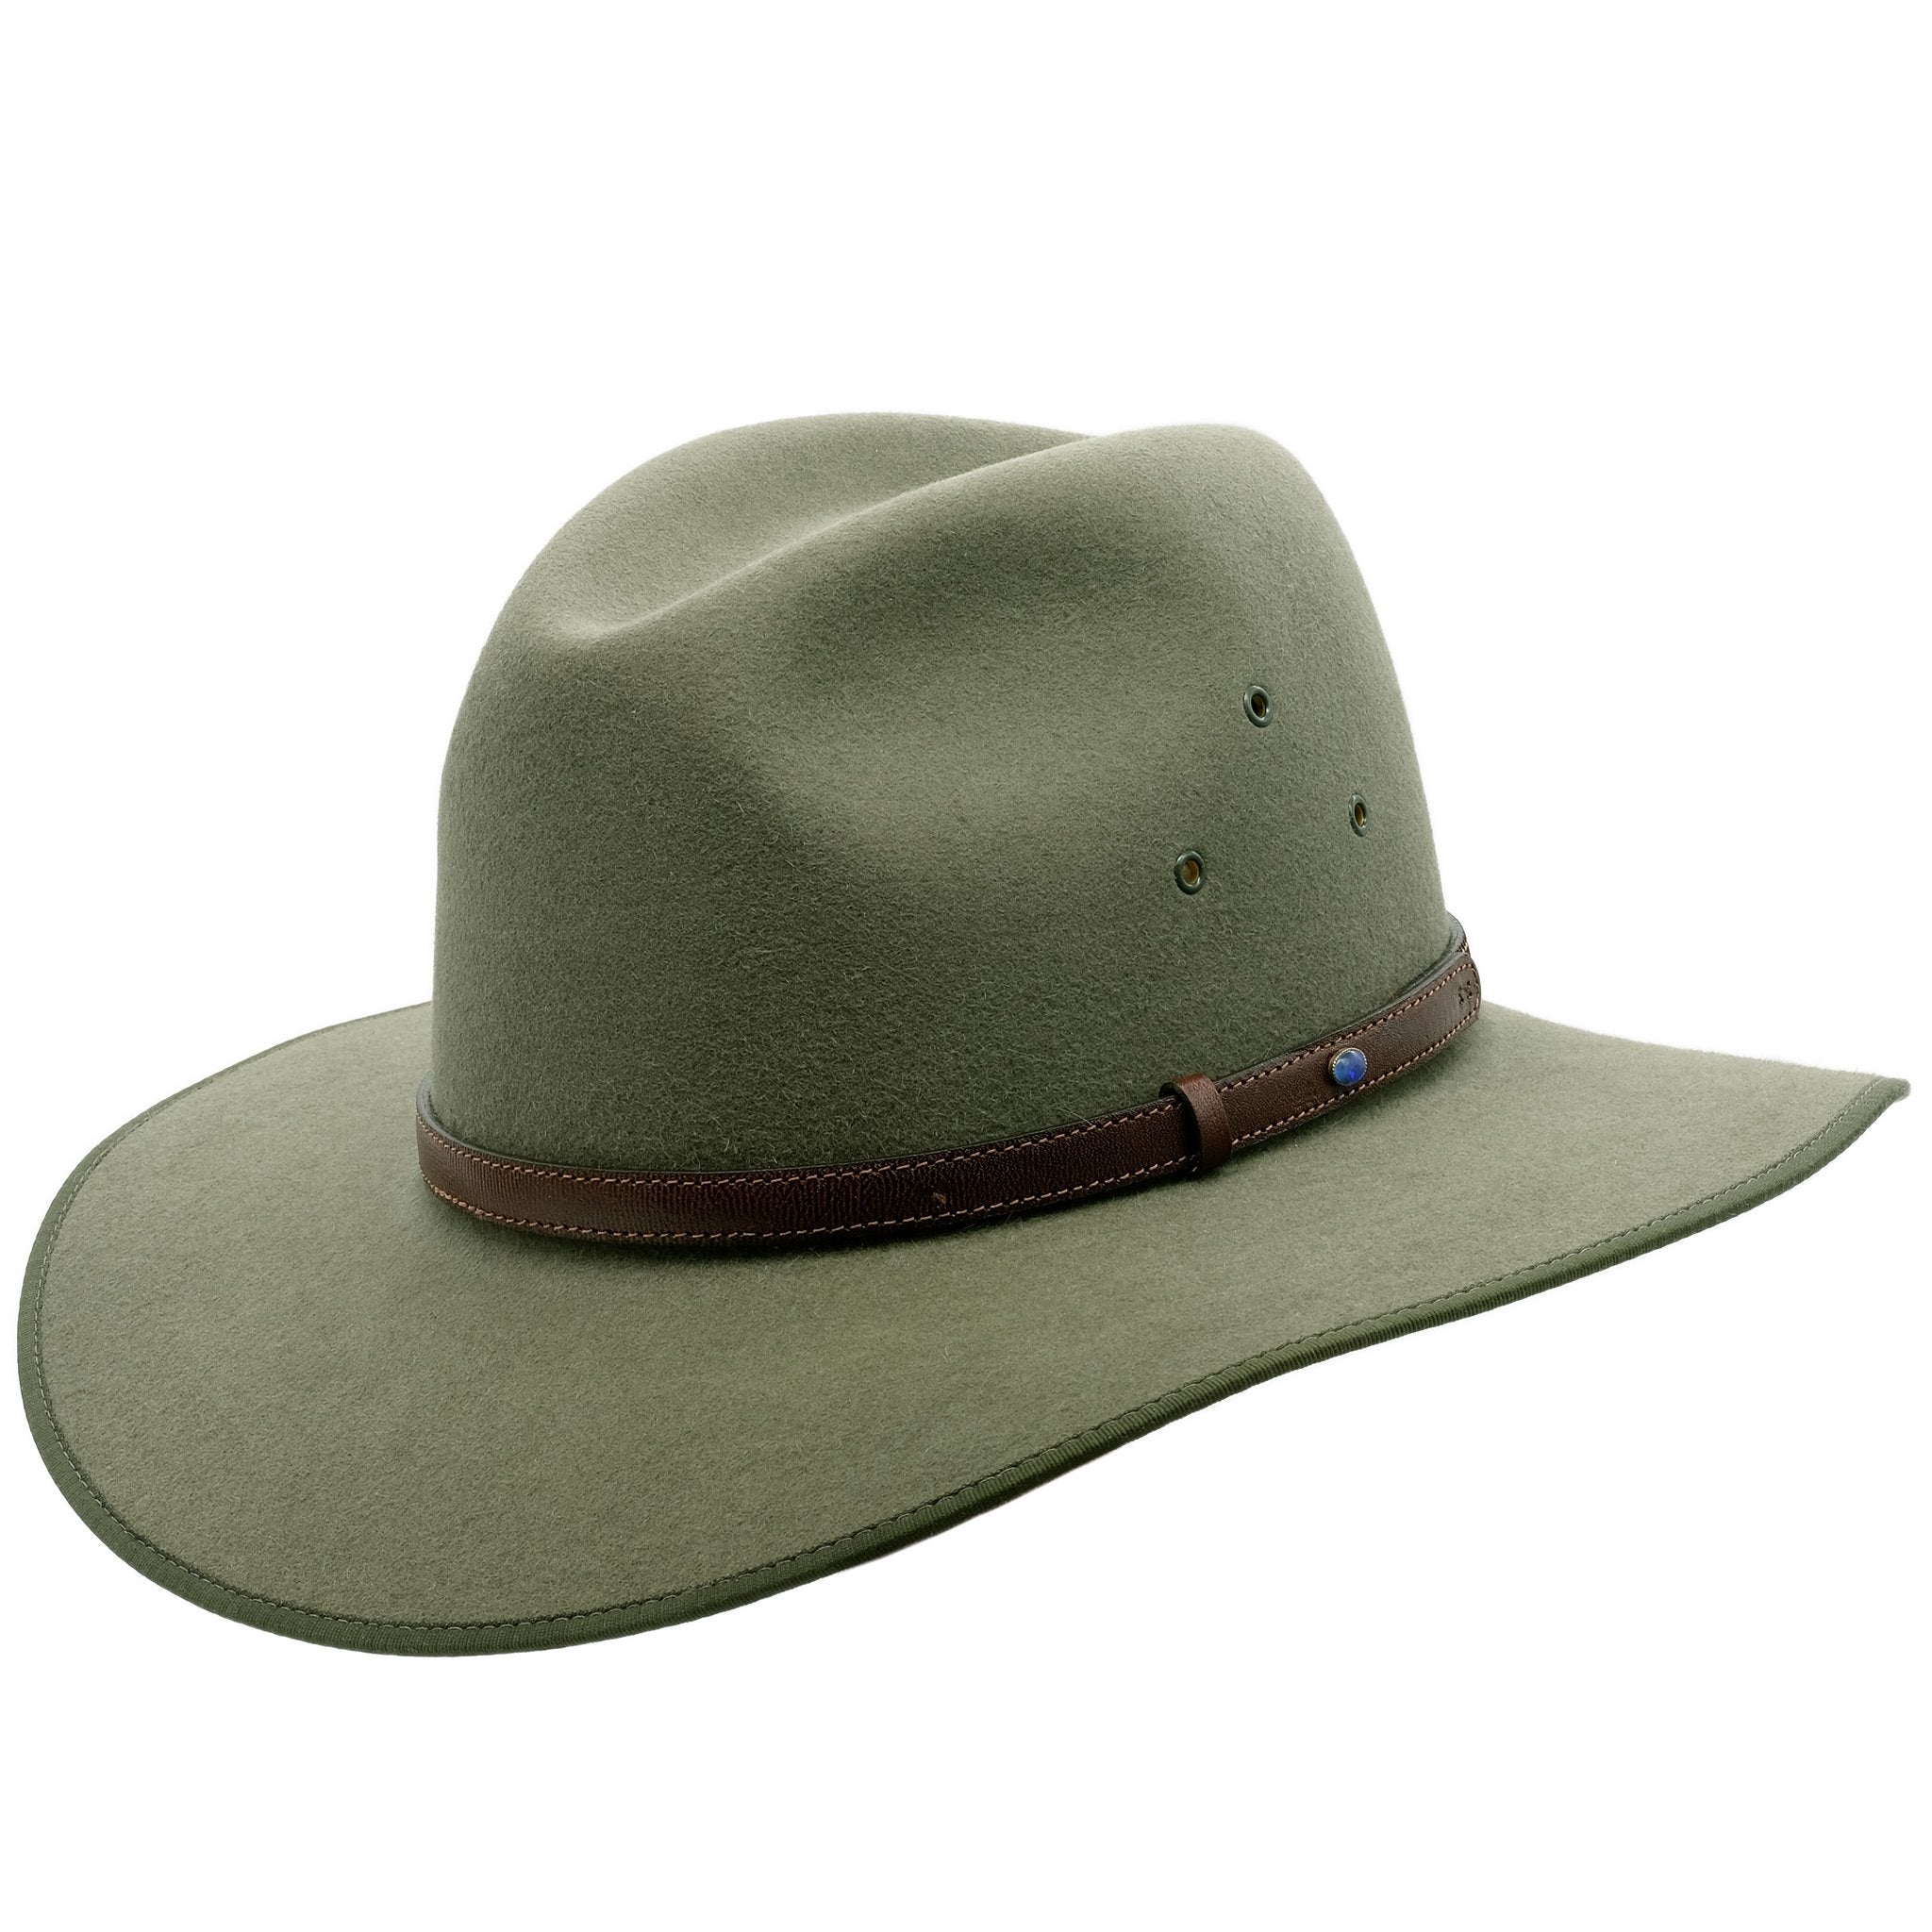 Angle view of Akubra Coober Pedy hat in Bluegrass green colour